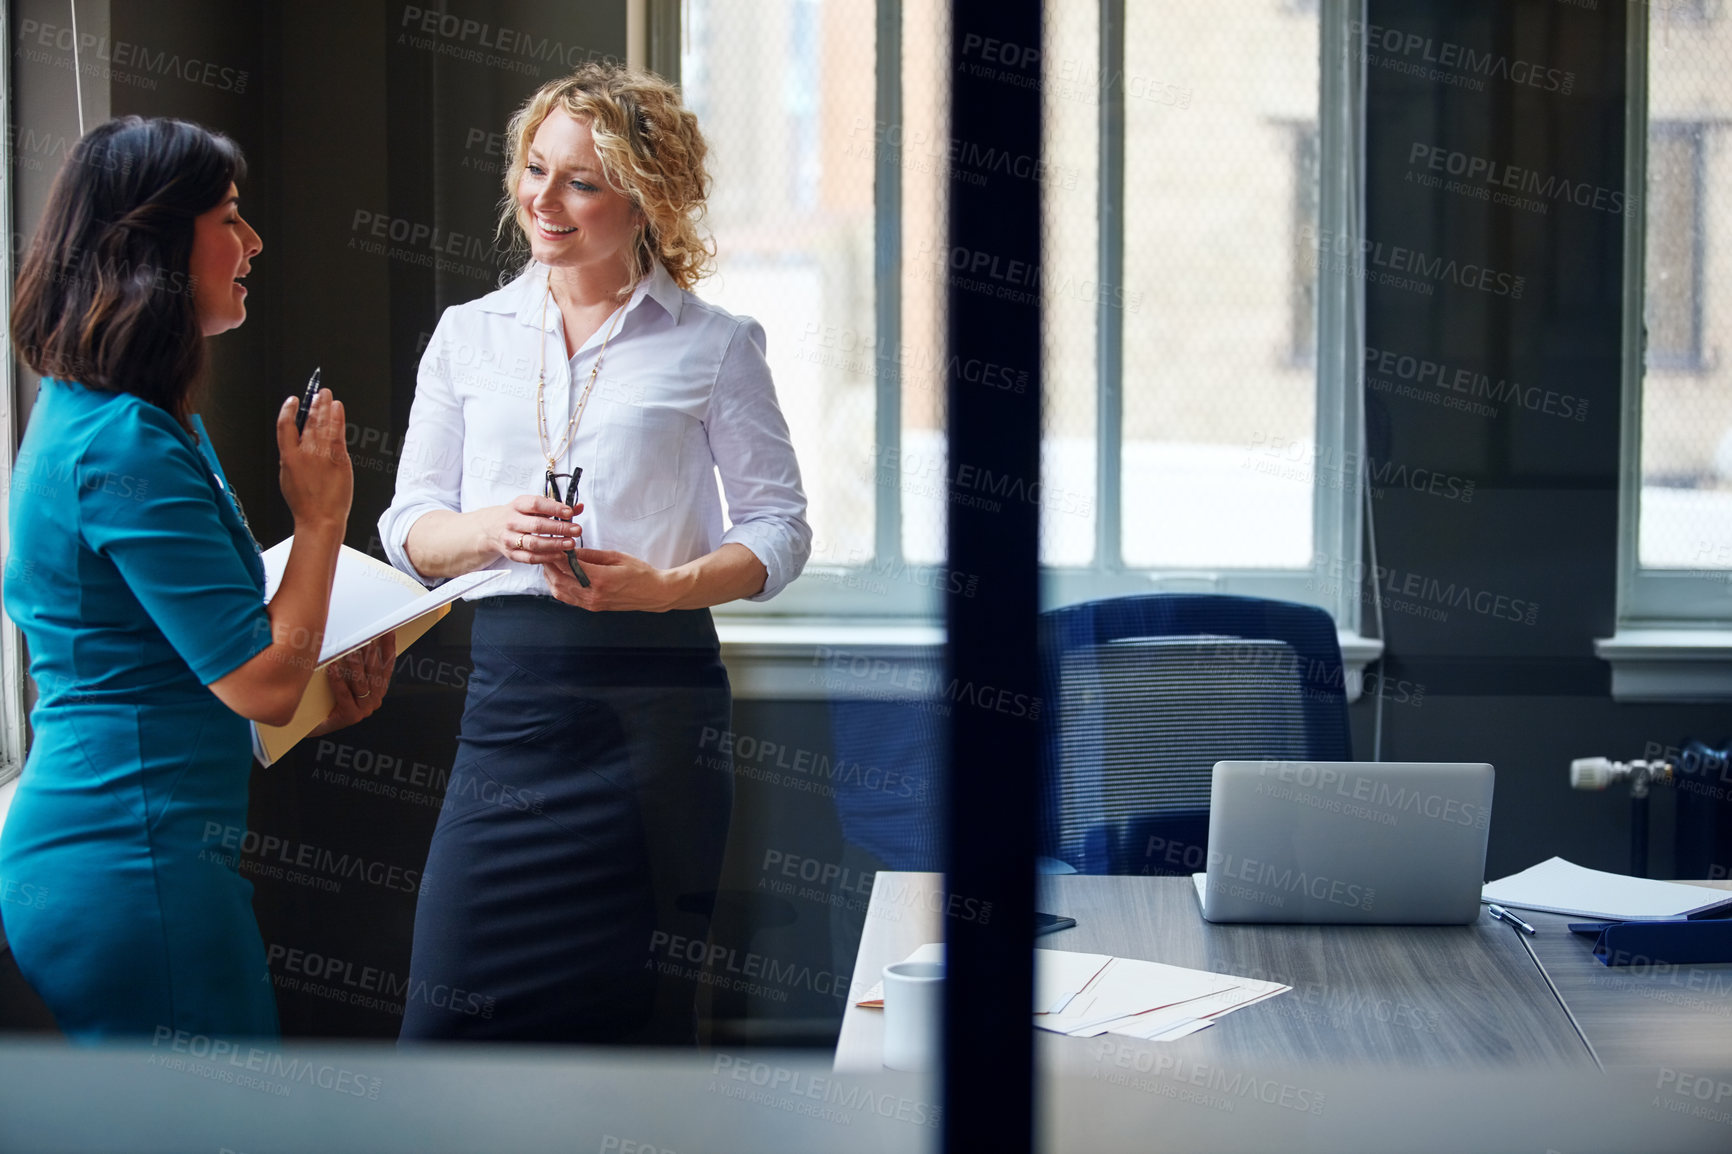 Buy stock photo Shot of two businesswomen having a discussion in an office